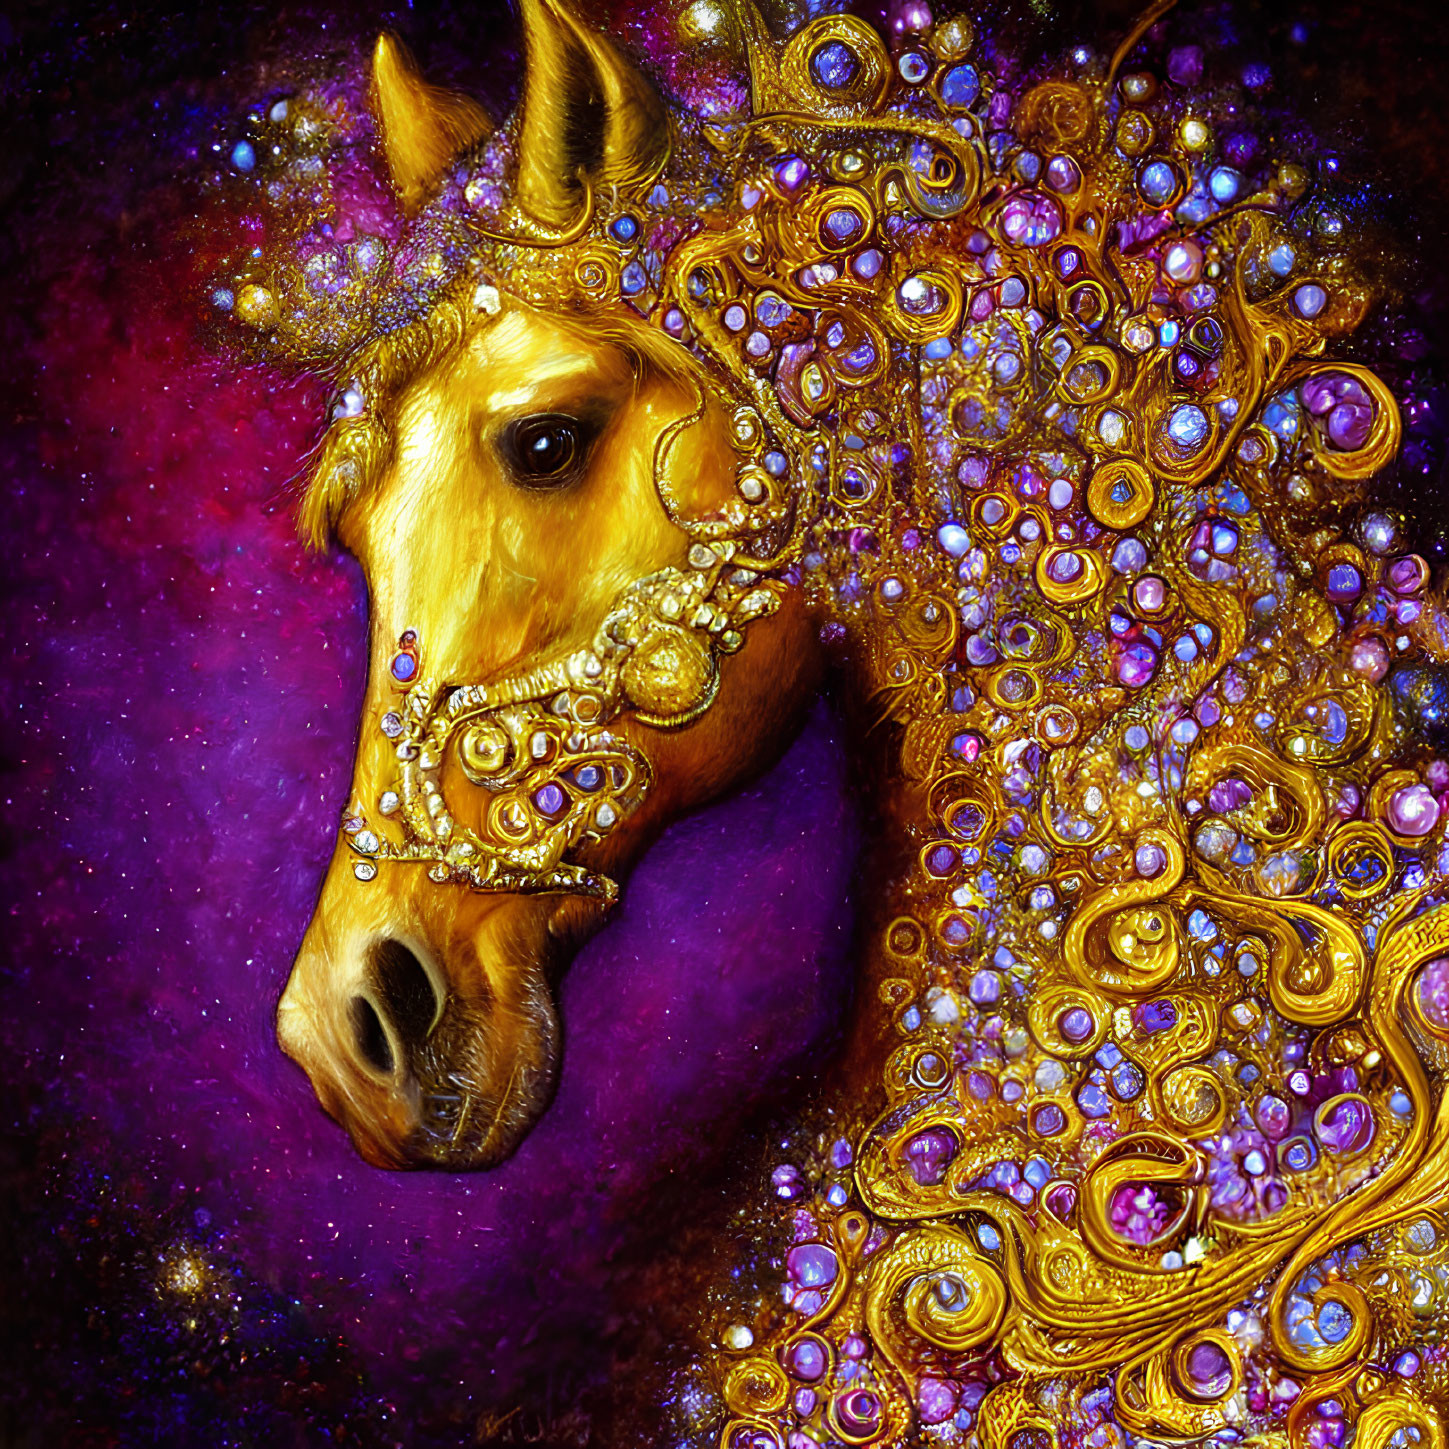 Horse adorned with gold jewelry in cosmic setting